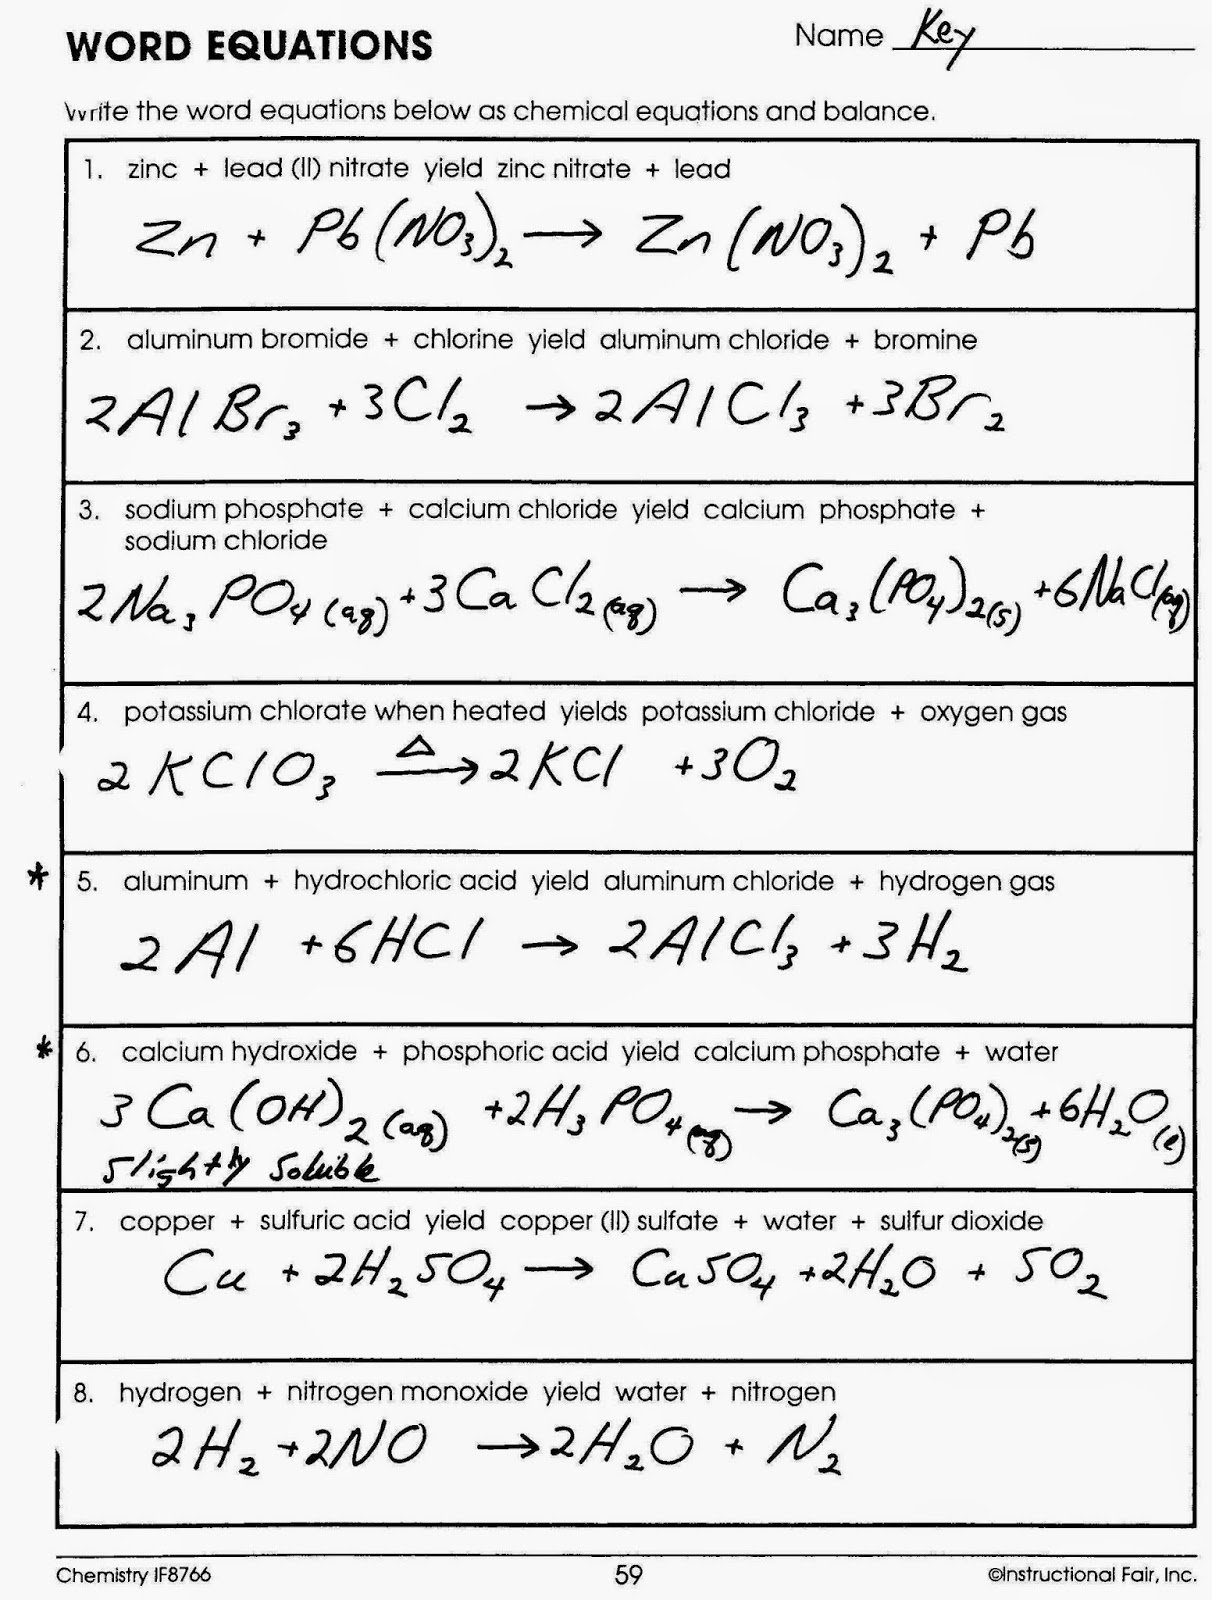 Chemistry Word Equations Worksheet Answers Worksheets For All